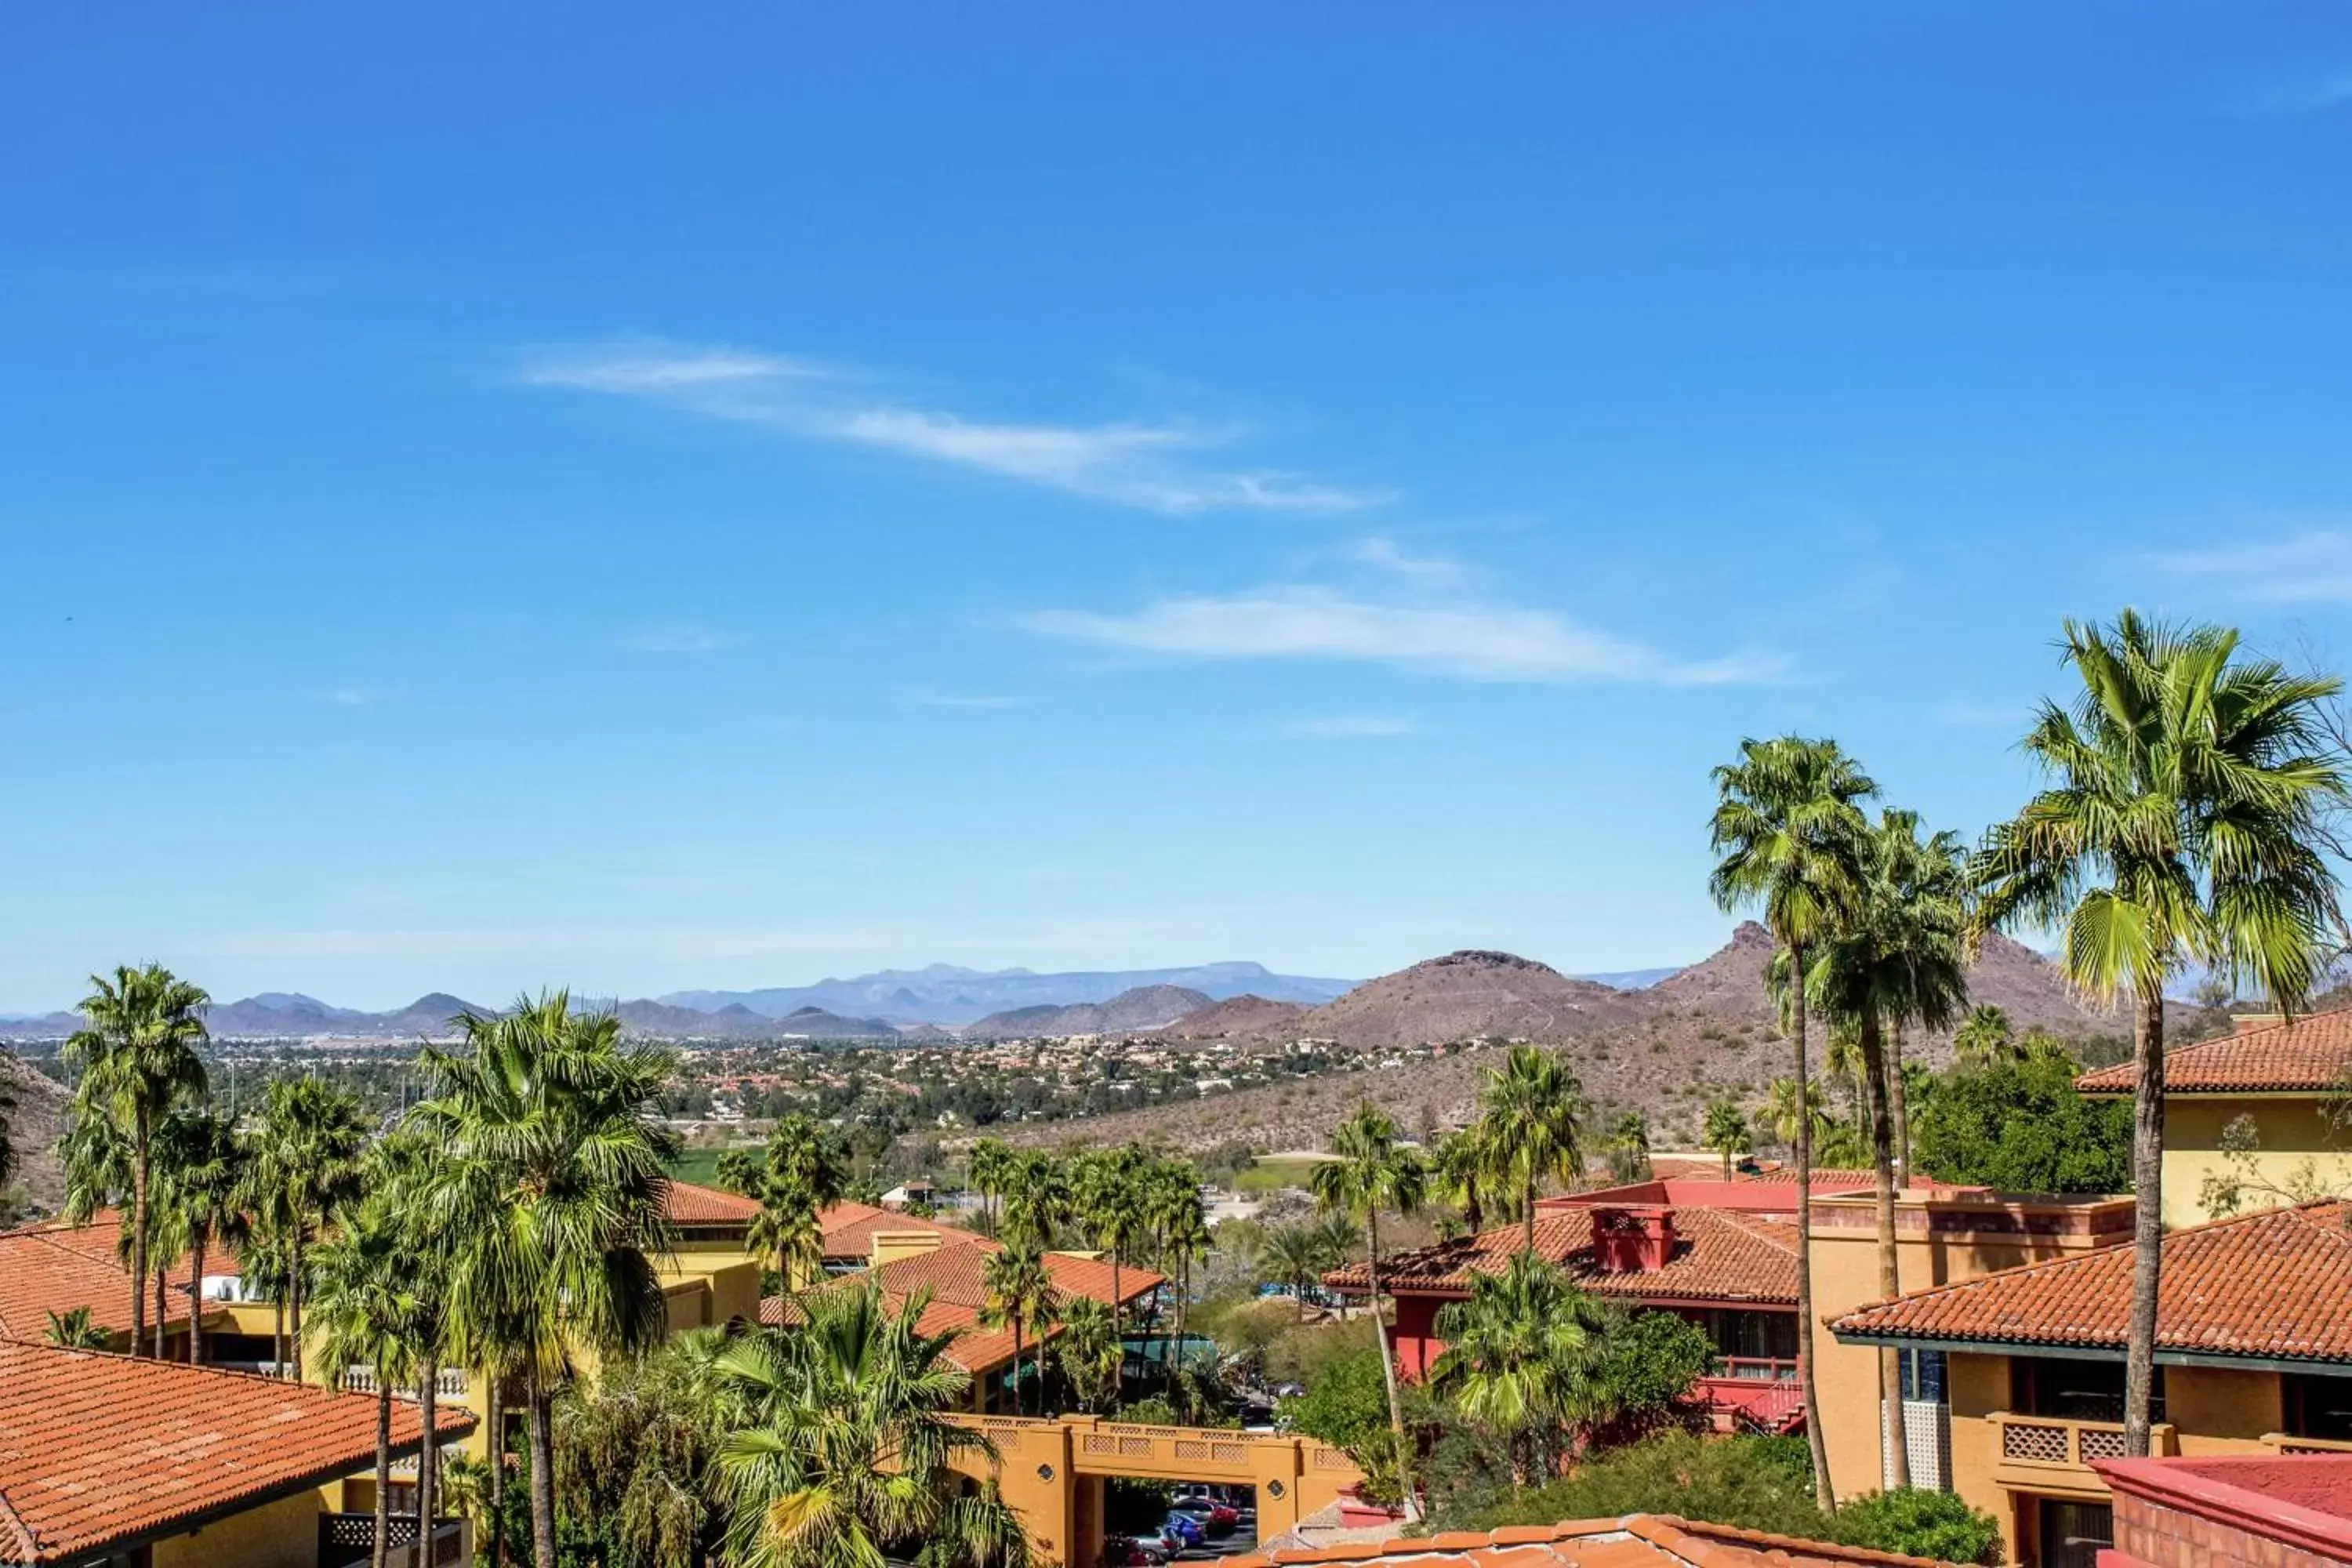 Property building, Mountain View in Hilton Phoenix Tapatio Cliffs Resort